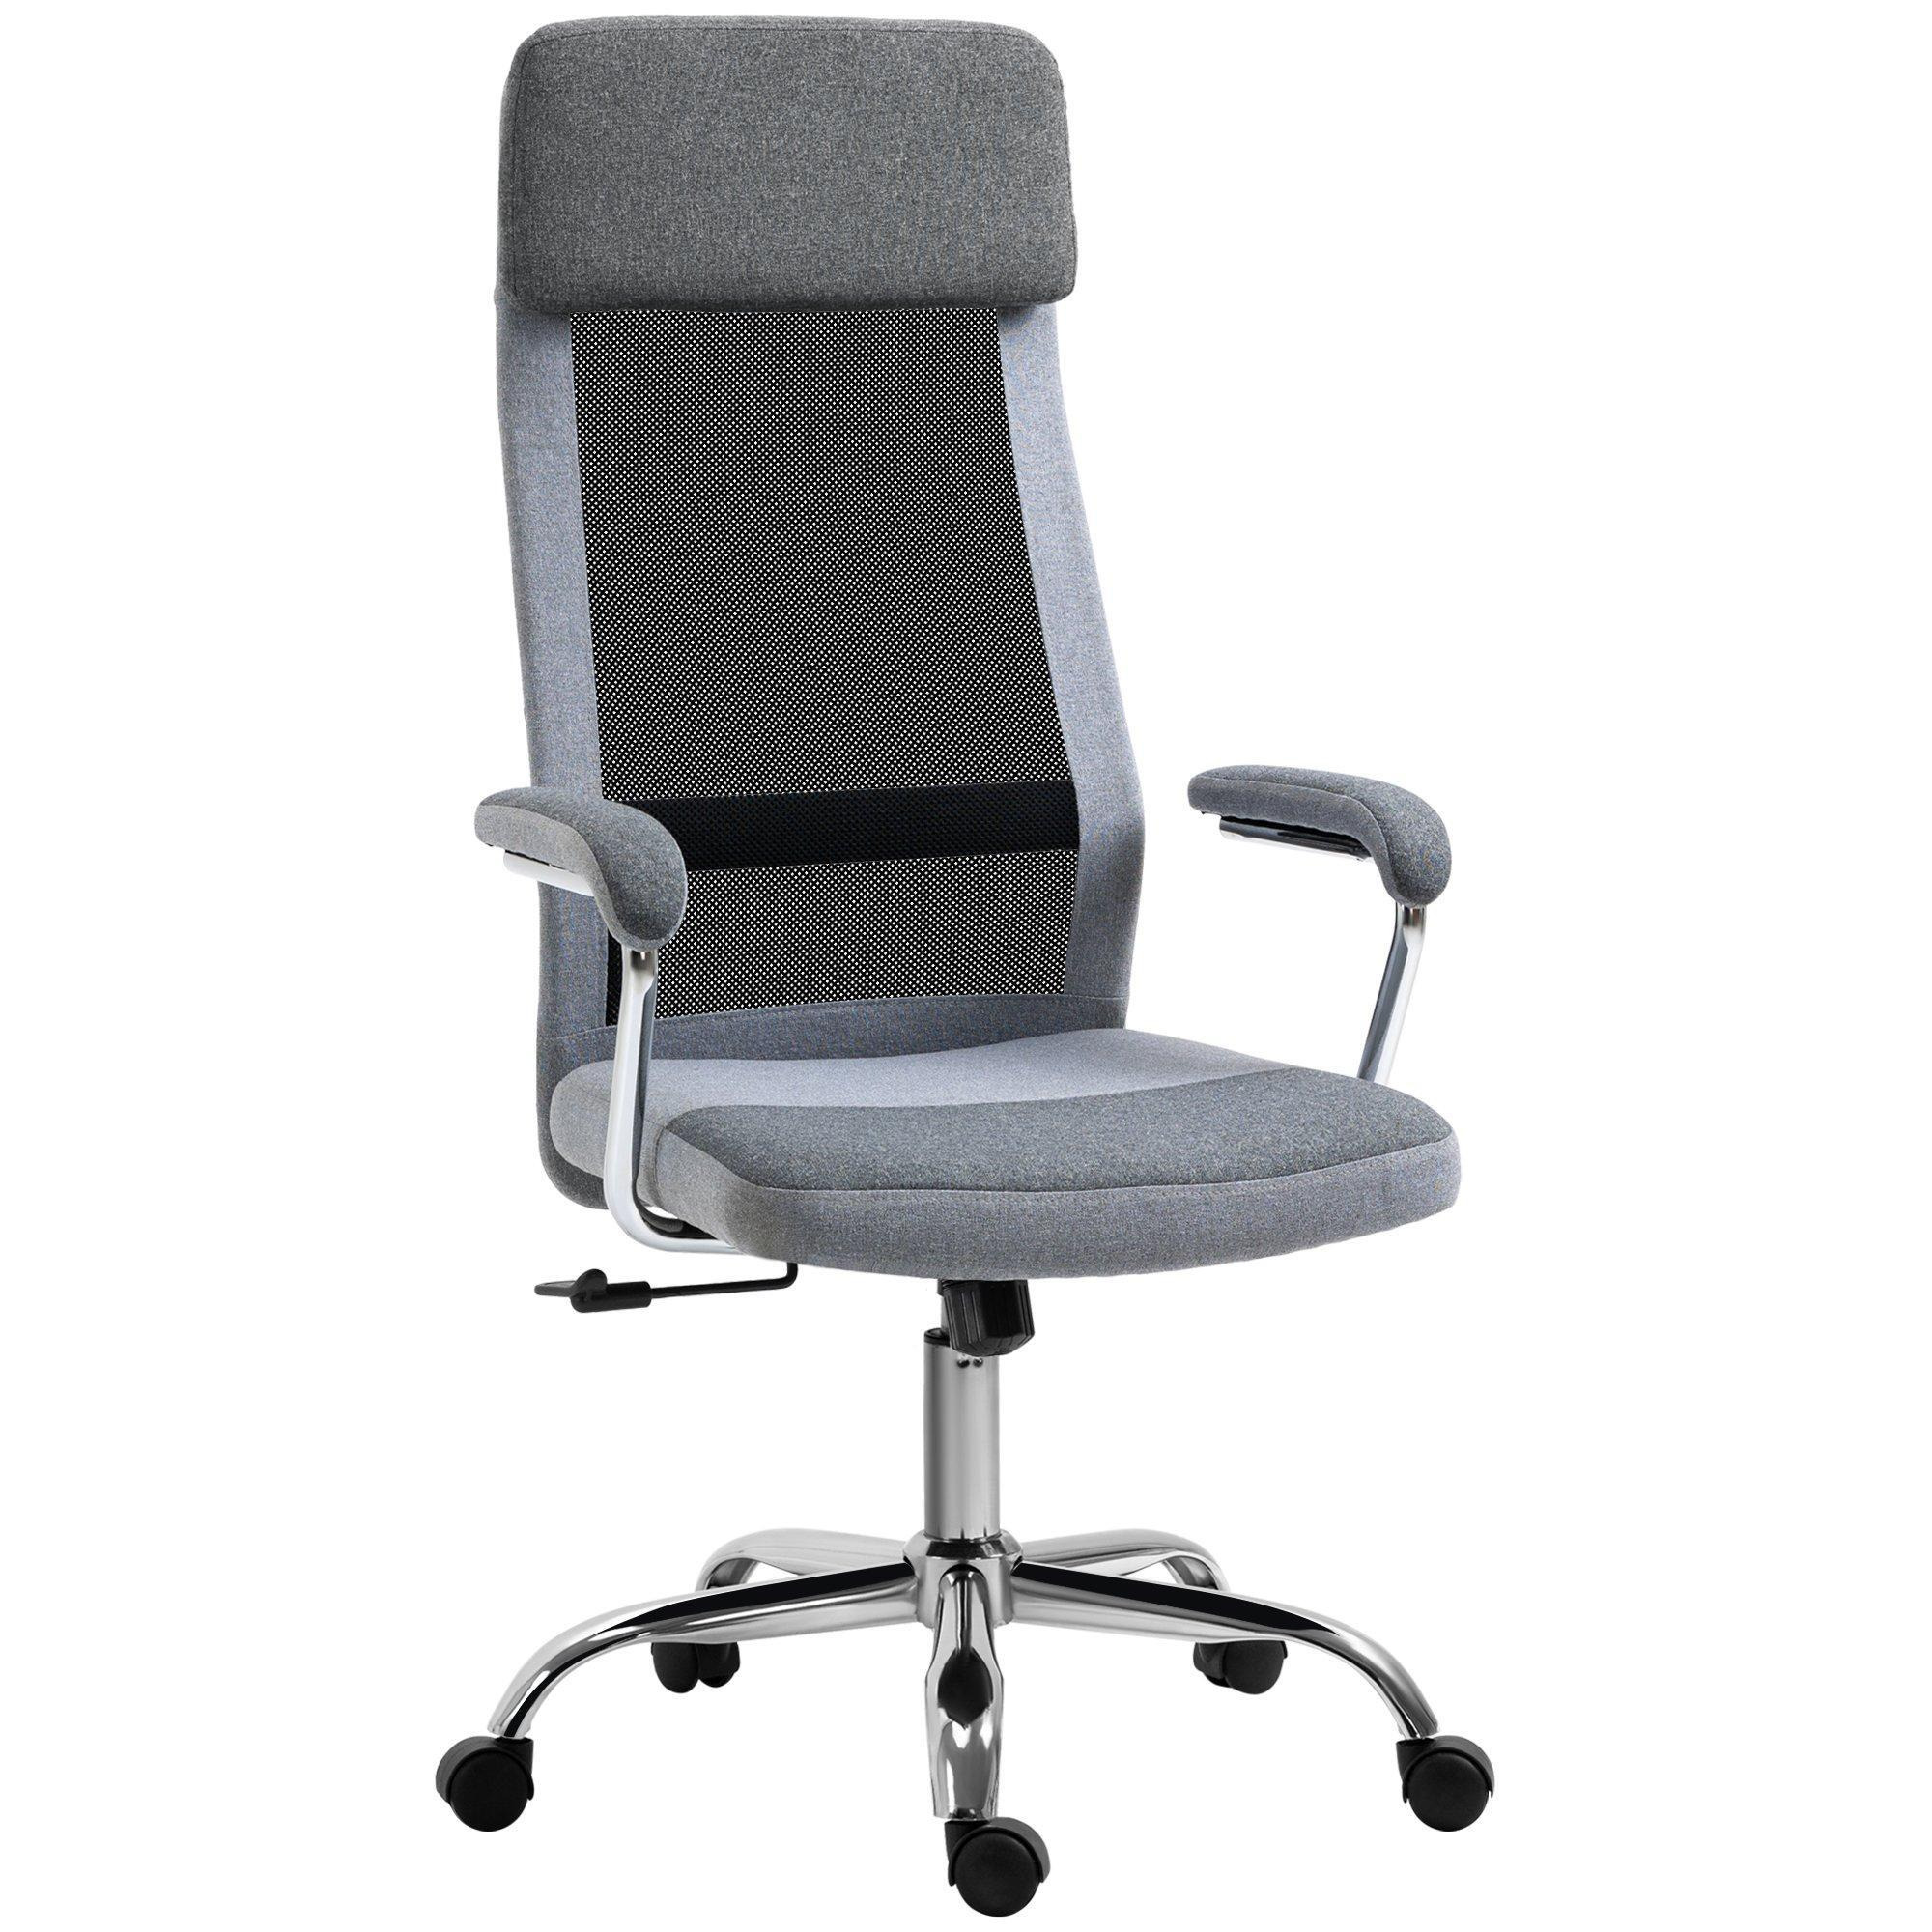 Office Chair Mesh High Back Swivel Task PC Desk Chair Home and Arm - image 1